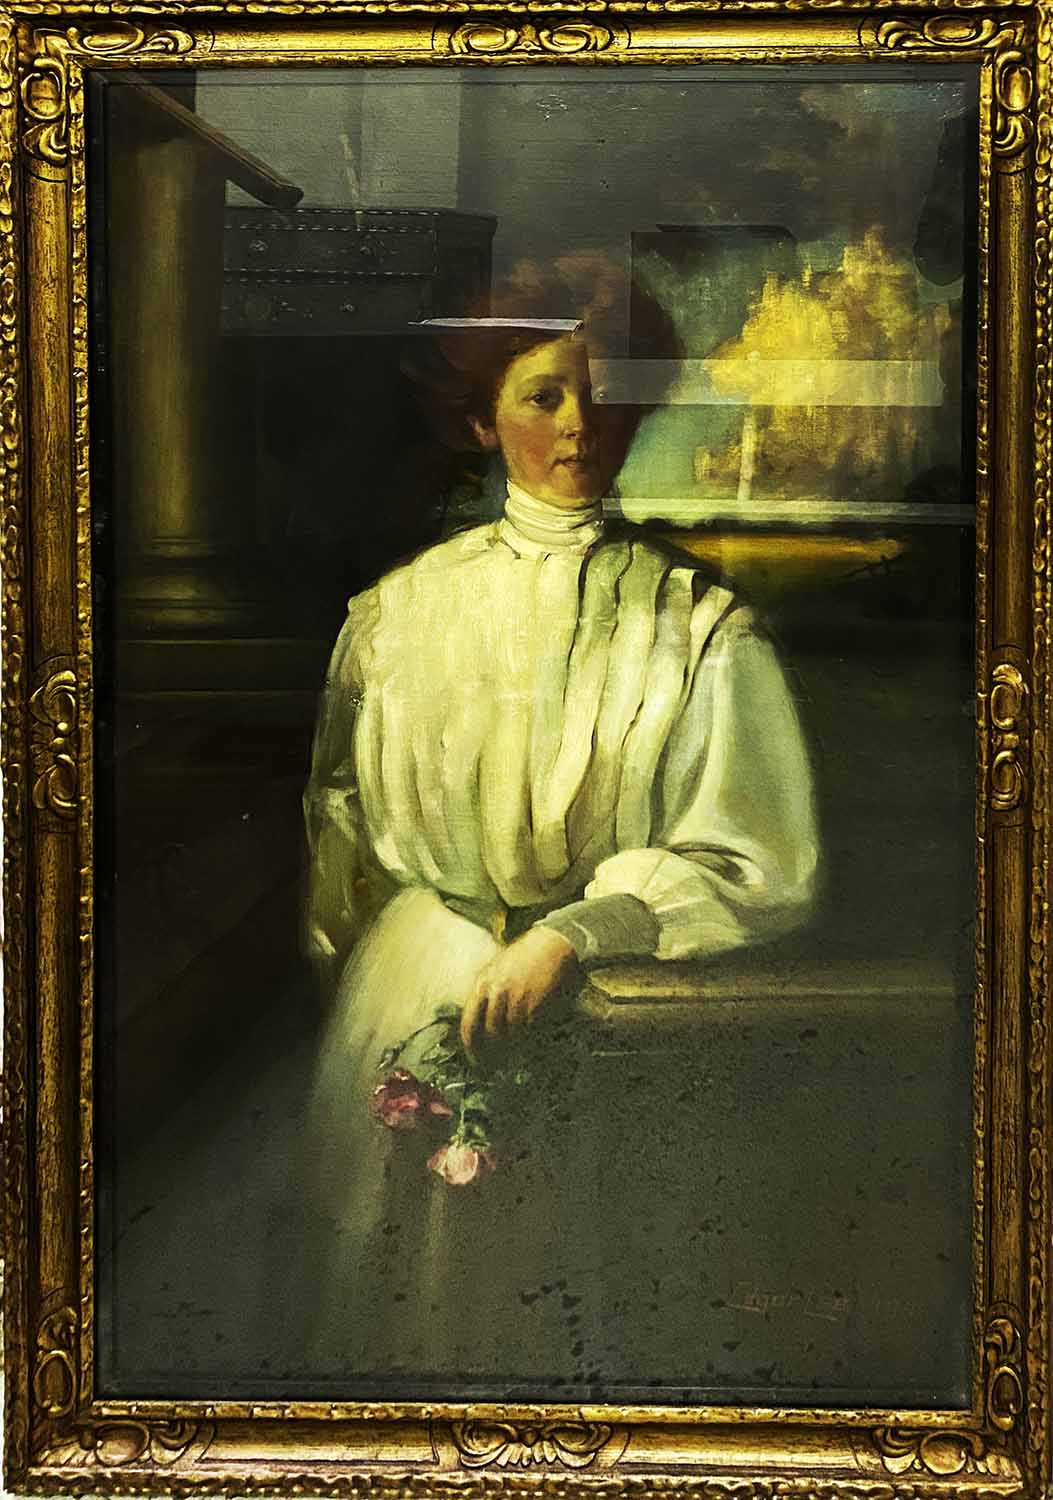 EDGAR LEE 'A Lady in a White Dress Holding Roses', 1910, oil on canvas, signed and dated,